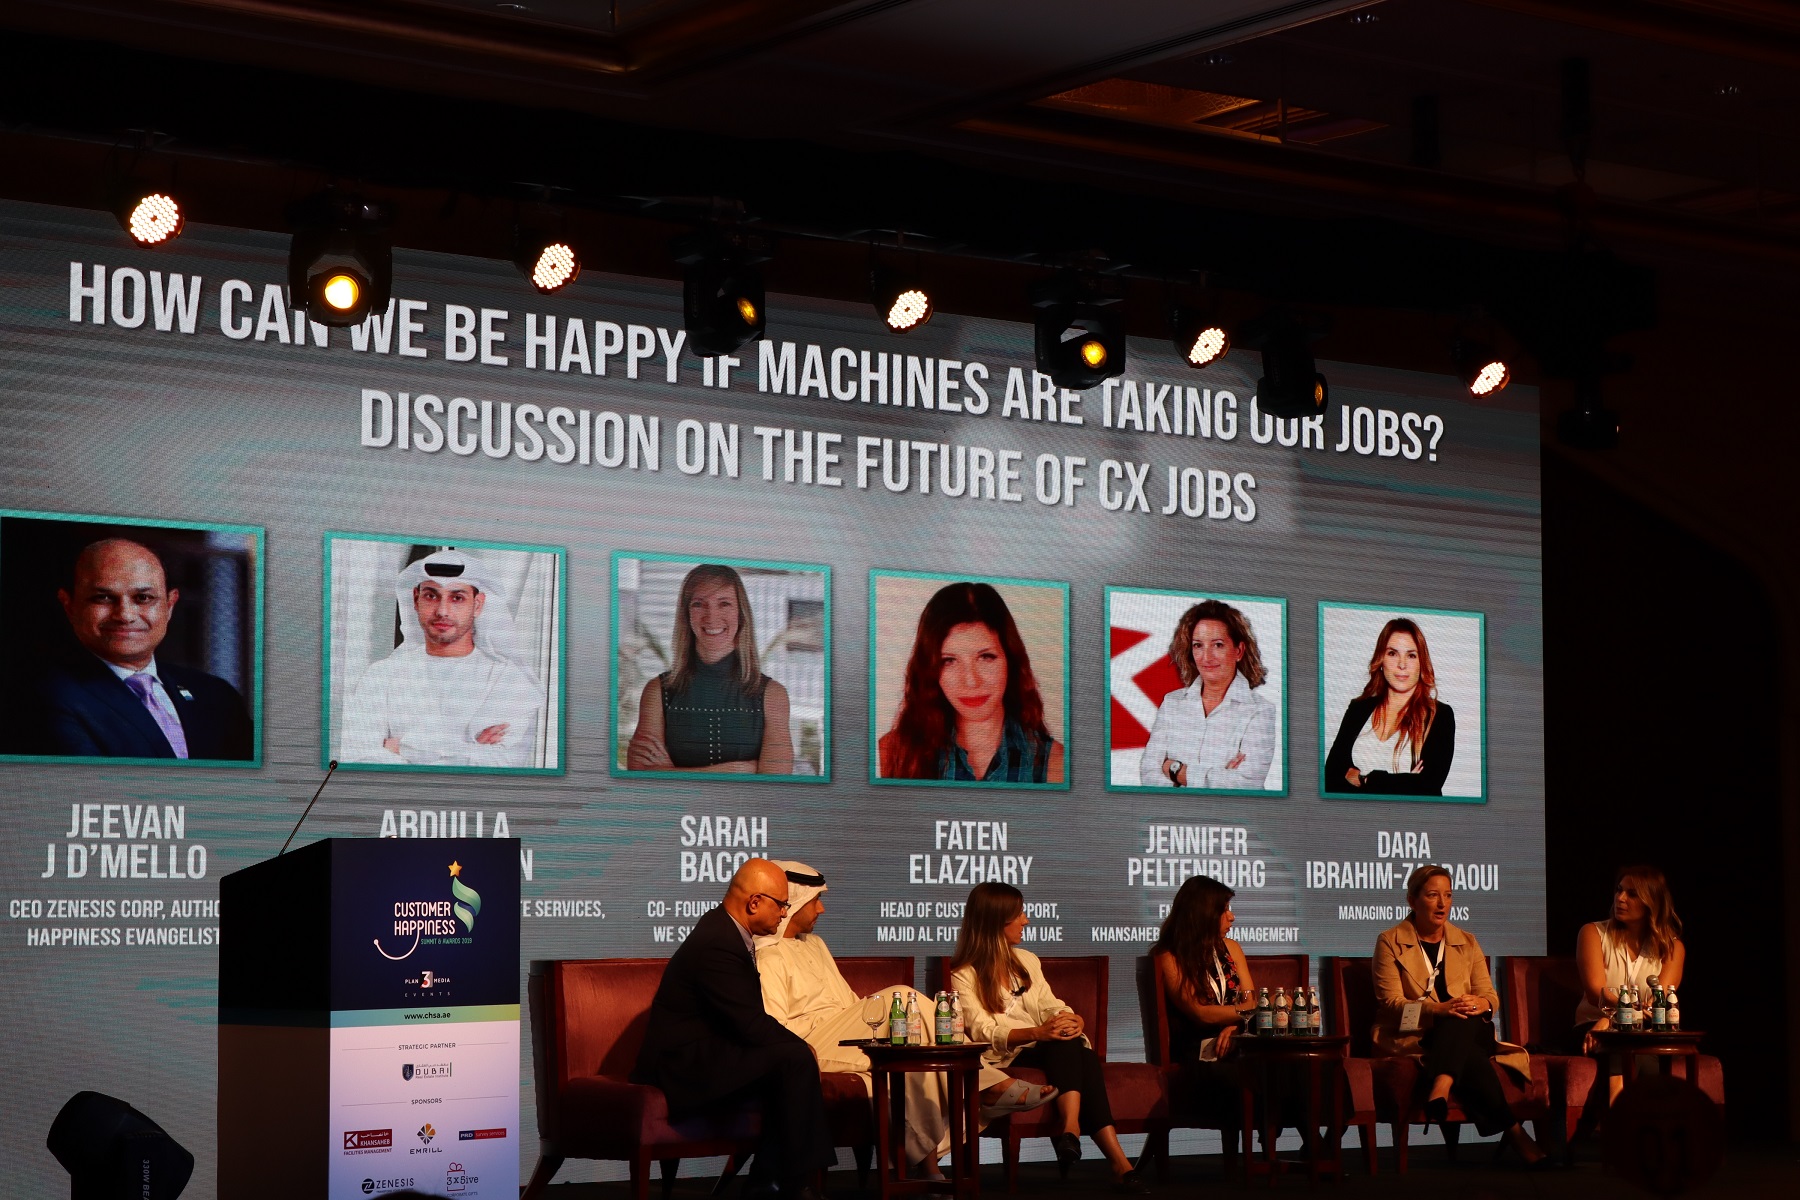 CHSA Panel Discussion: How can we be happy if machines are taking our jobs?